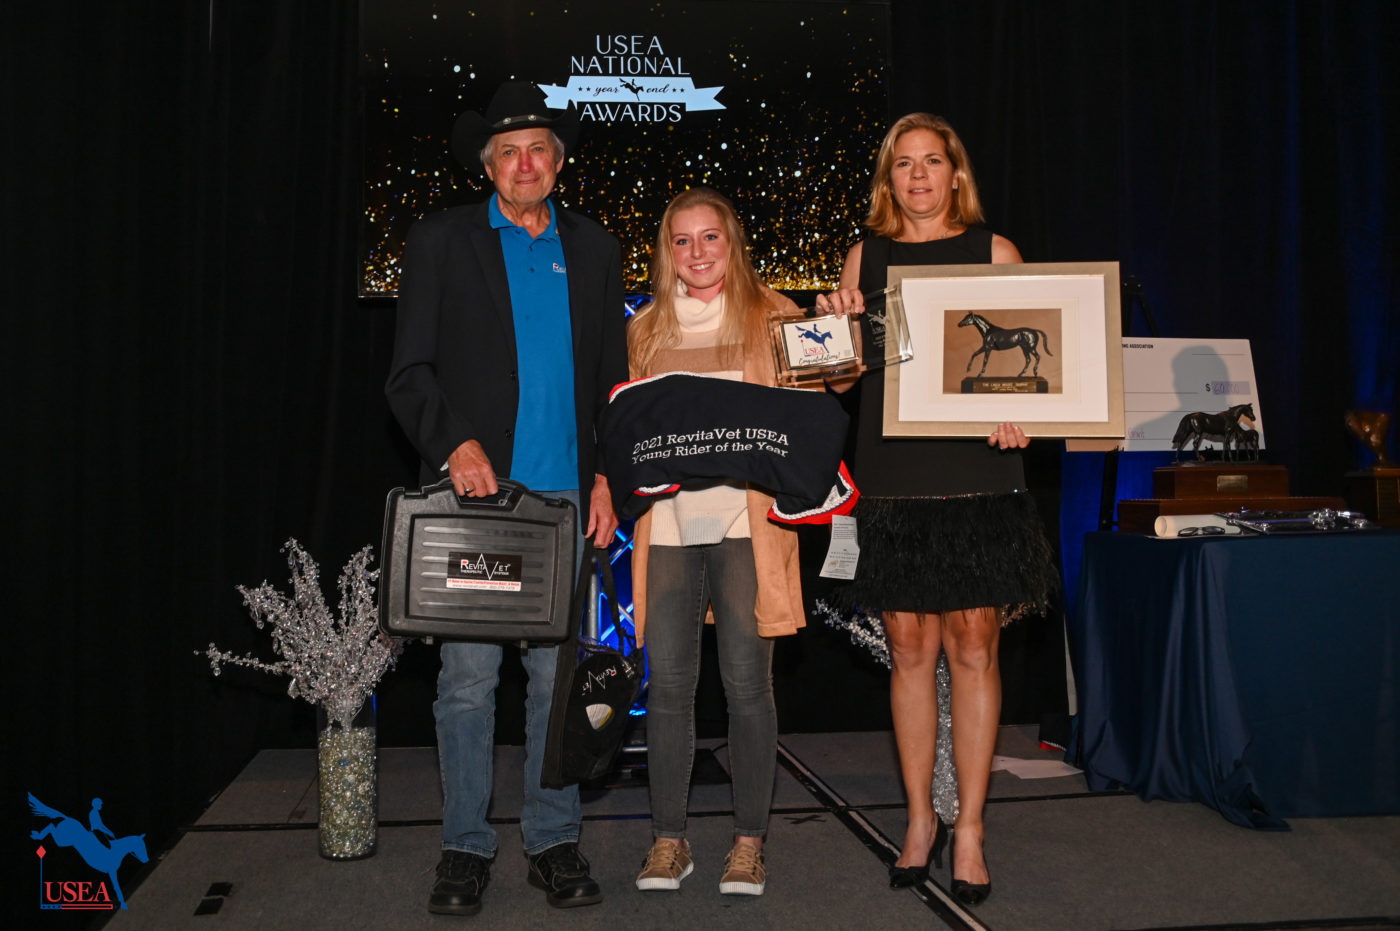 Tom Neuman of Revitavet presents the Revitavet USEA Young Rider of the Year to Alexandra Baugh